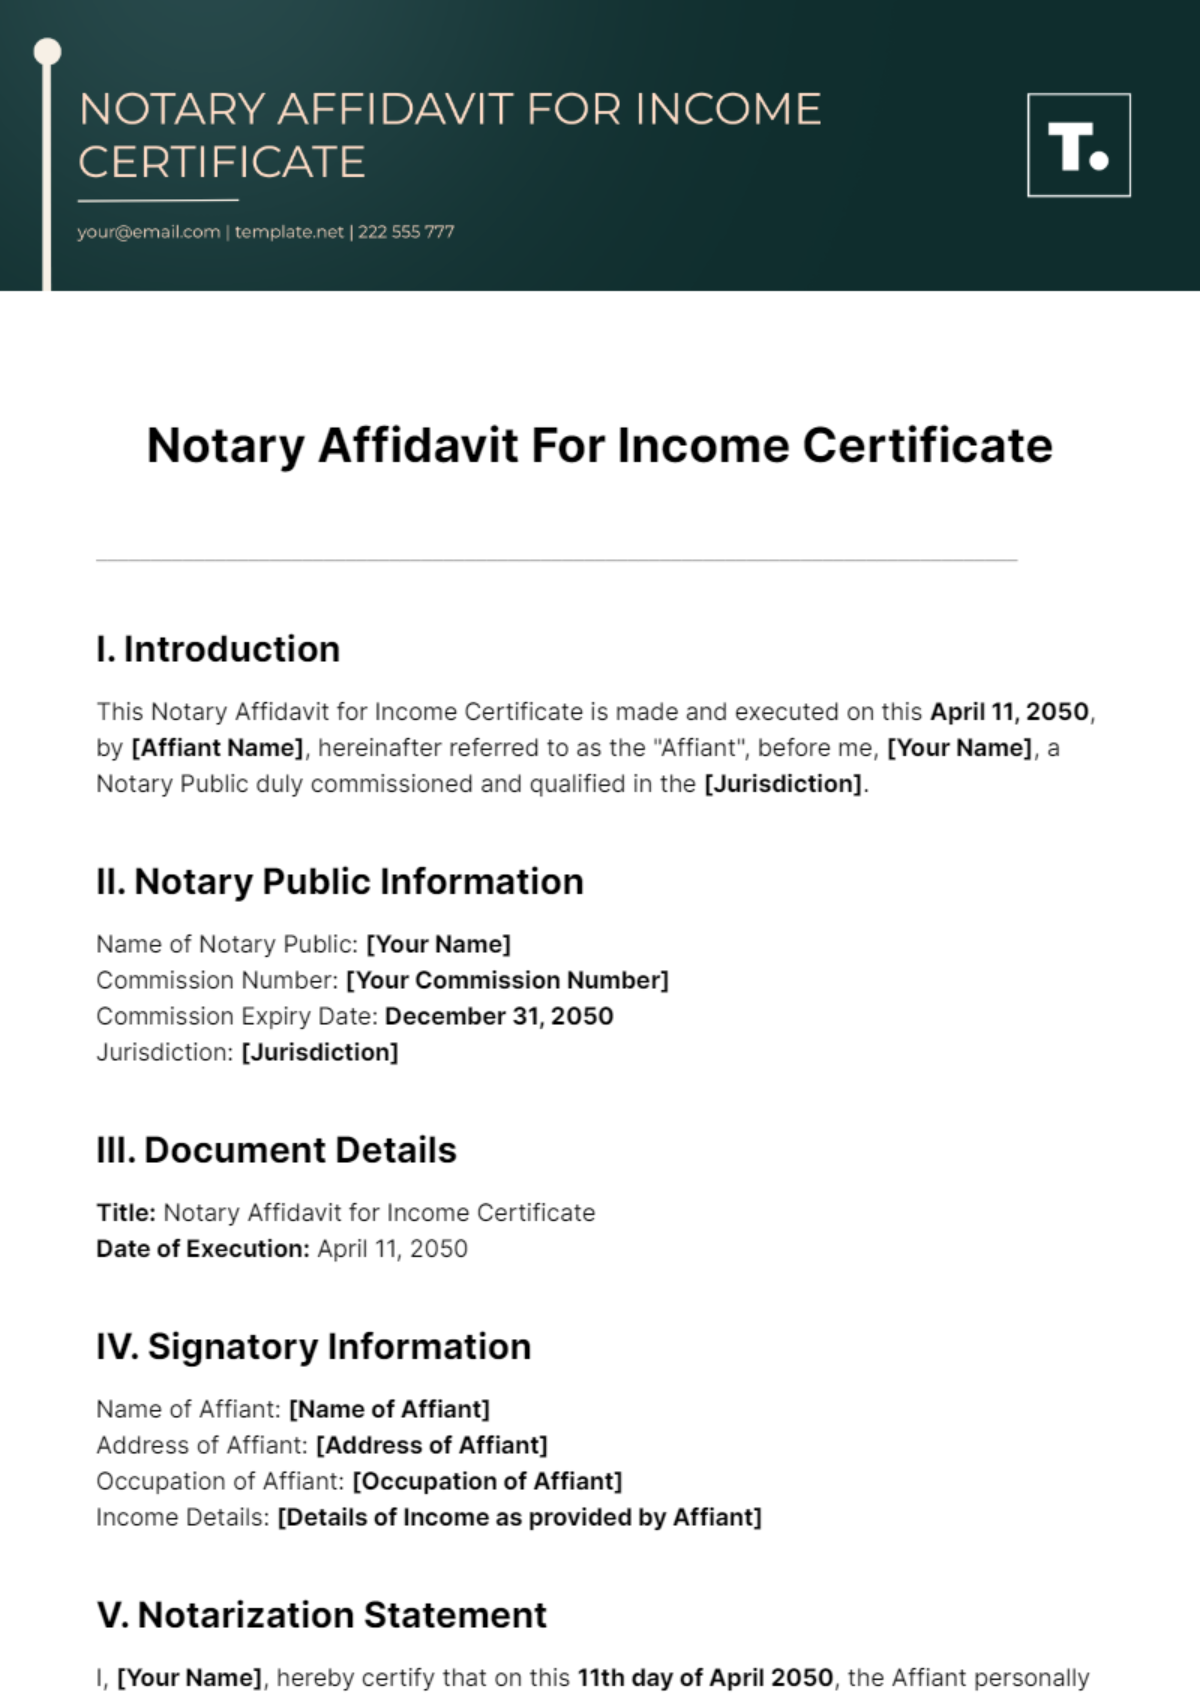 Free Notary Affidavit For Income Certificate Template